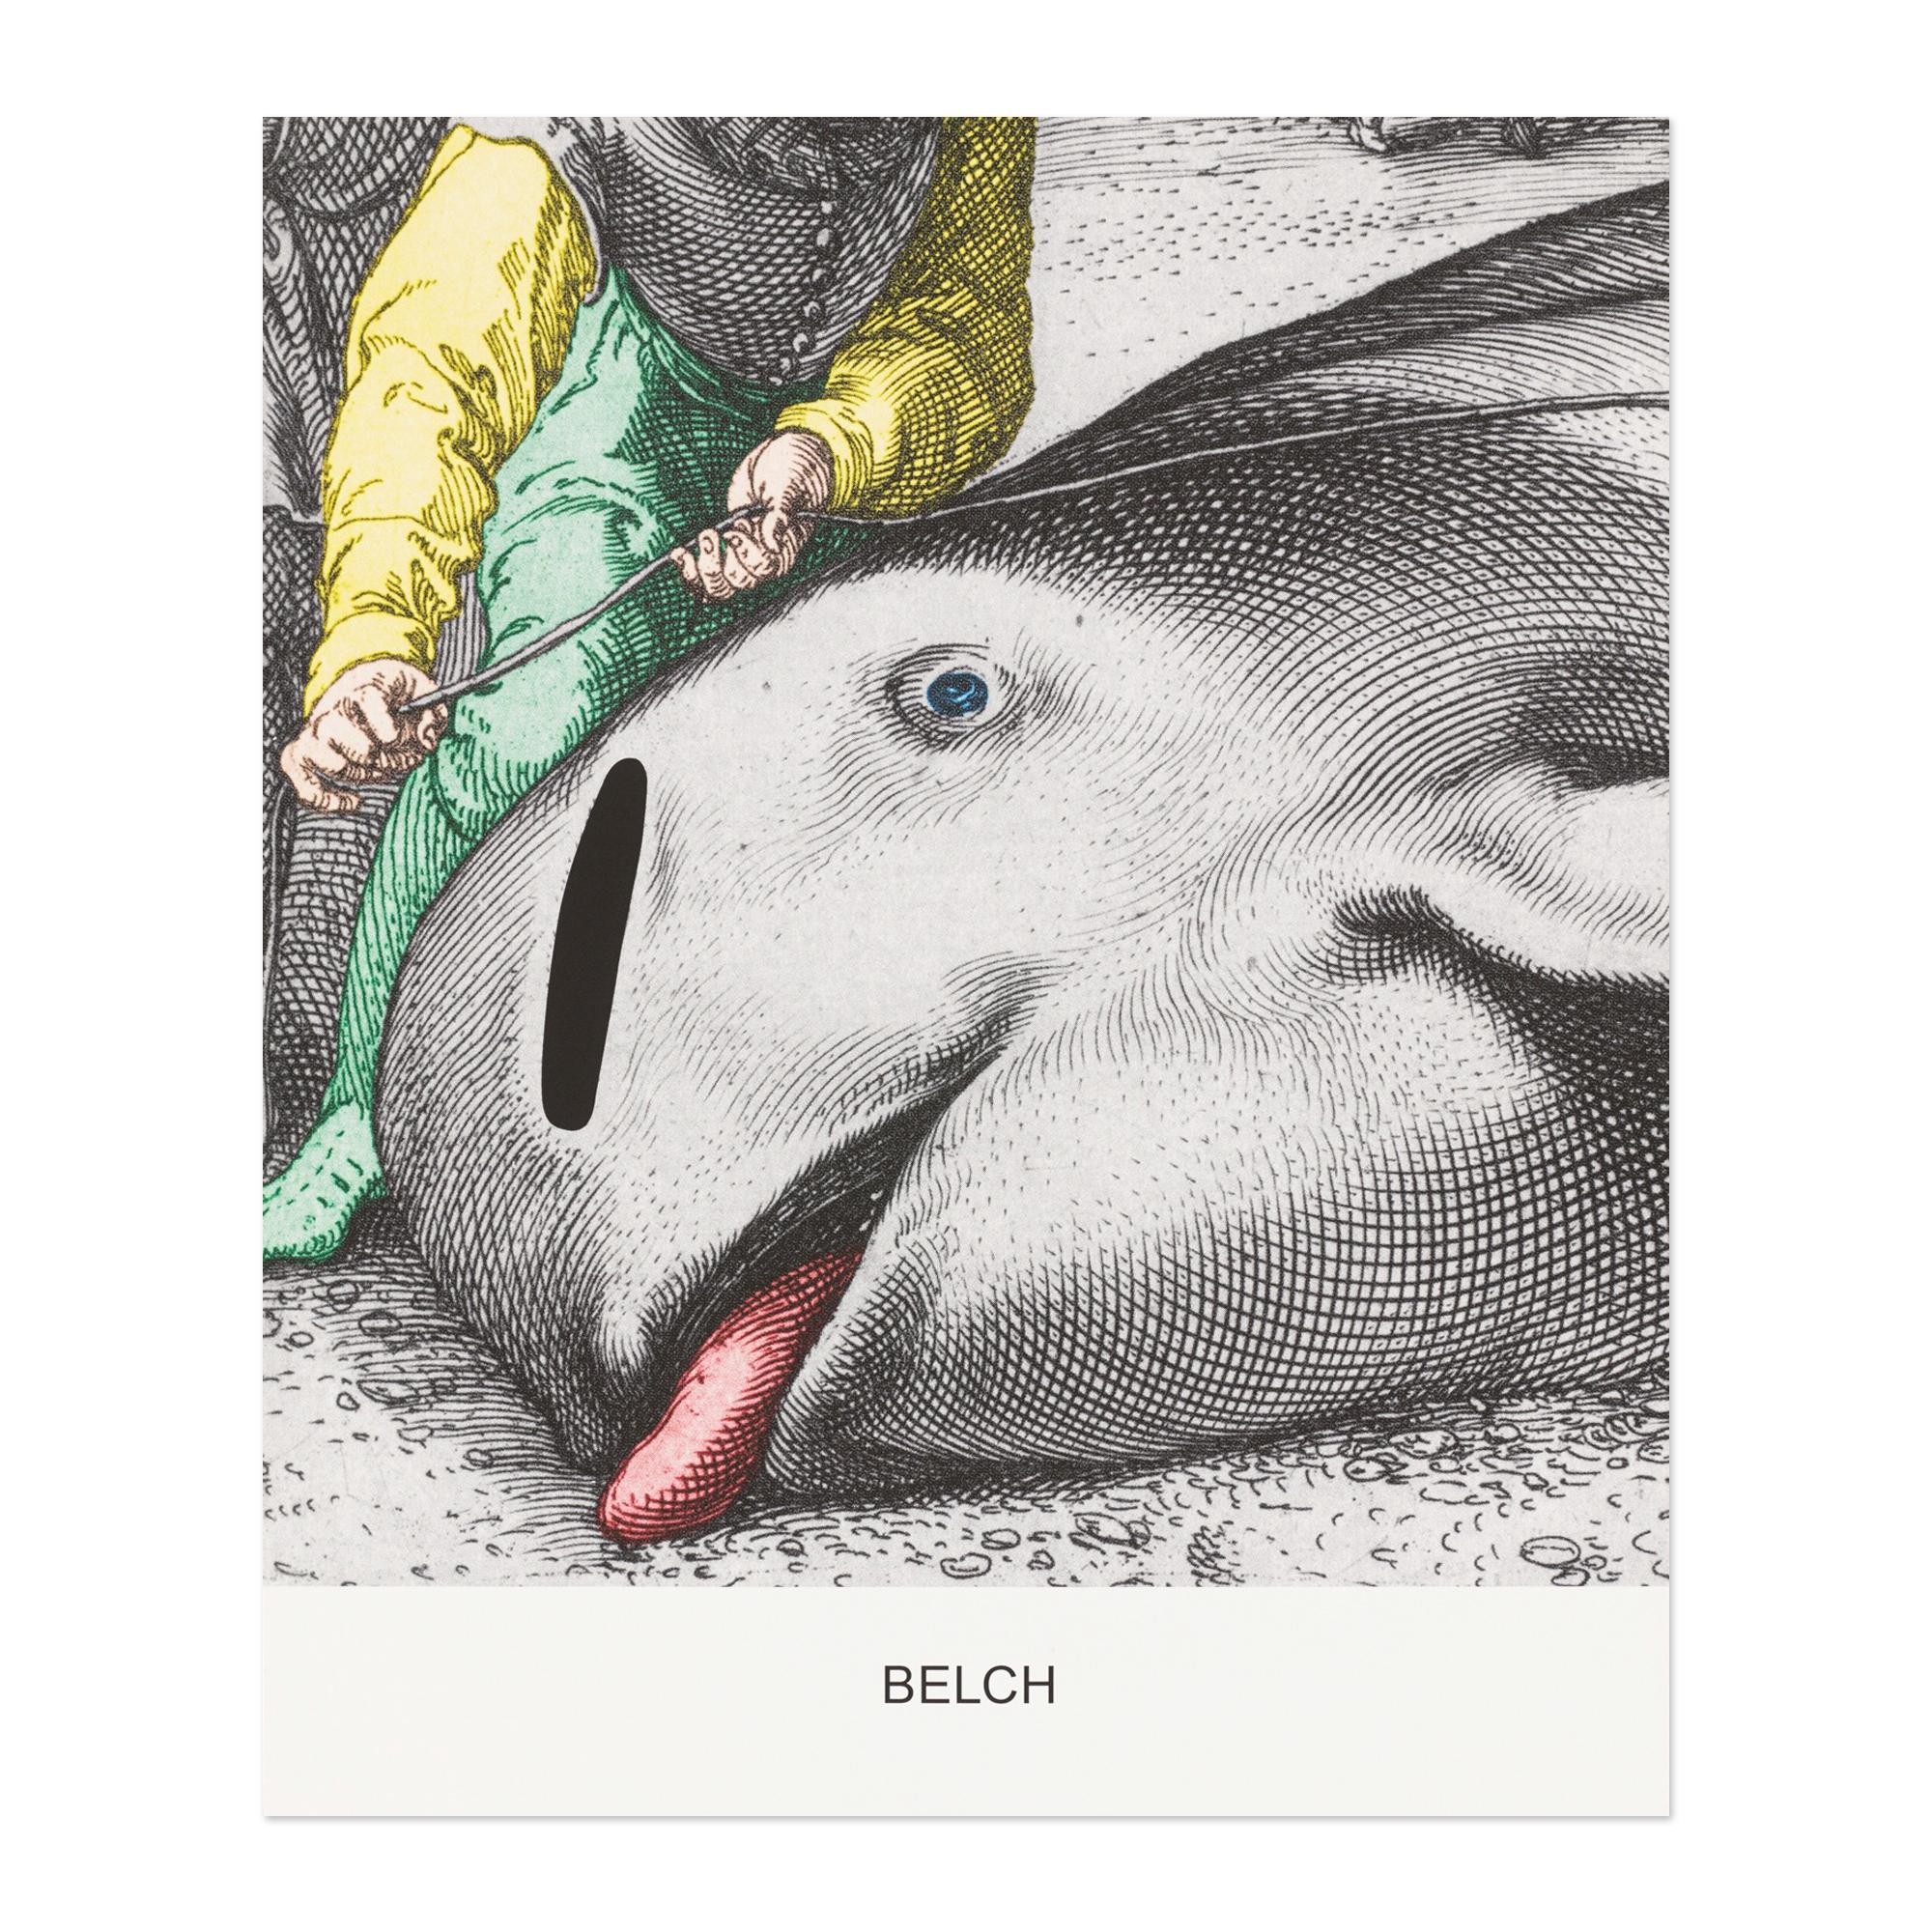 John Baldessari (American, 1931-2020)
Belch (from the Engraving with Sounds series), 2015
Medium: Archival inkjet print on paper
Dimensions: 36.8 x 30.5 cm
Edition of 25: Monogrammed and numbered on a label on the reverse
Condition: Very good